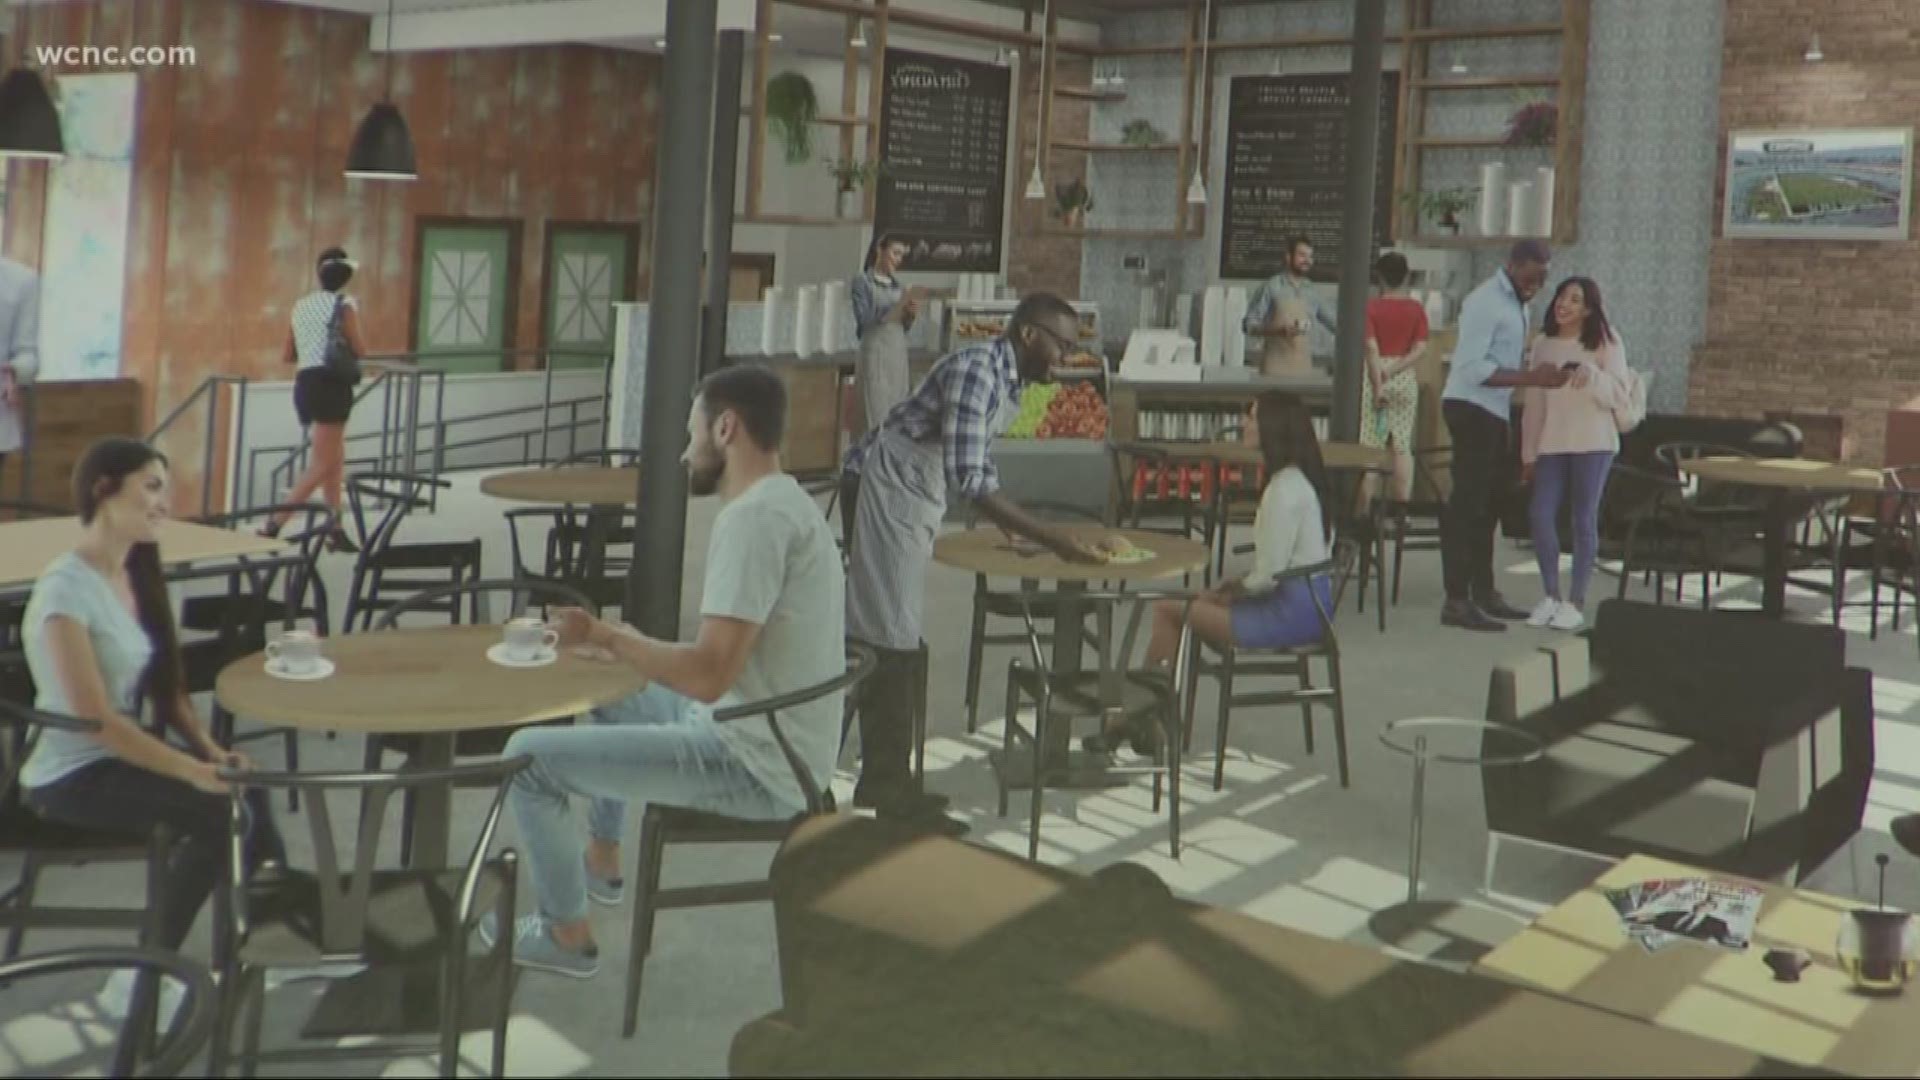 The restaurant will also feature a coffee shop for quick stops, and private areas for business meetings.